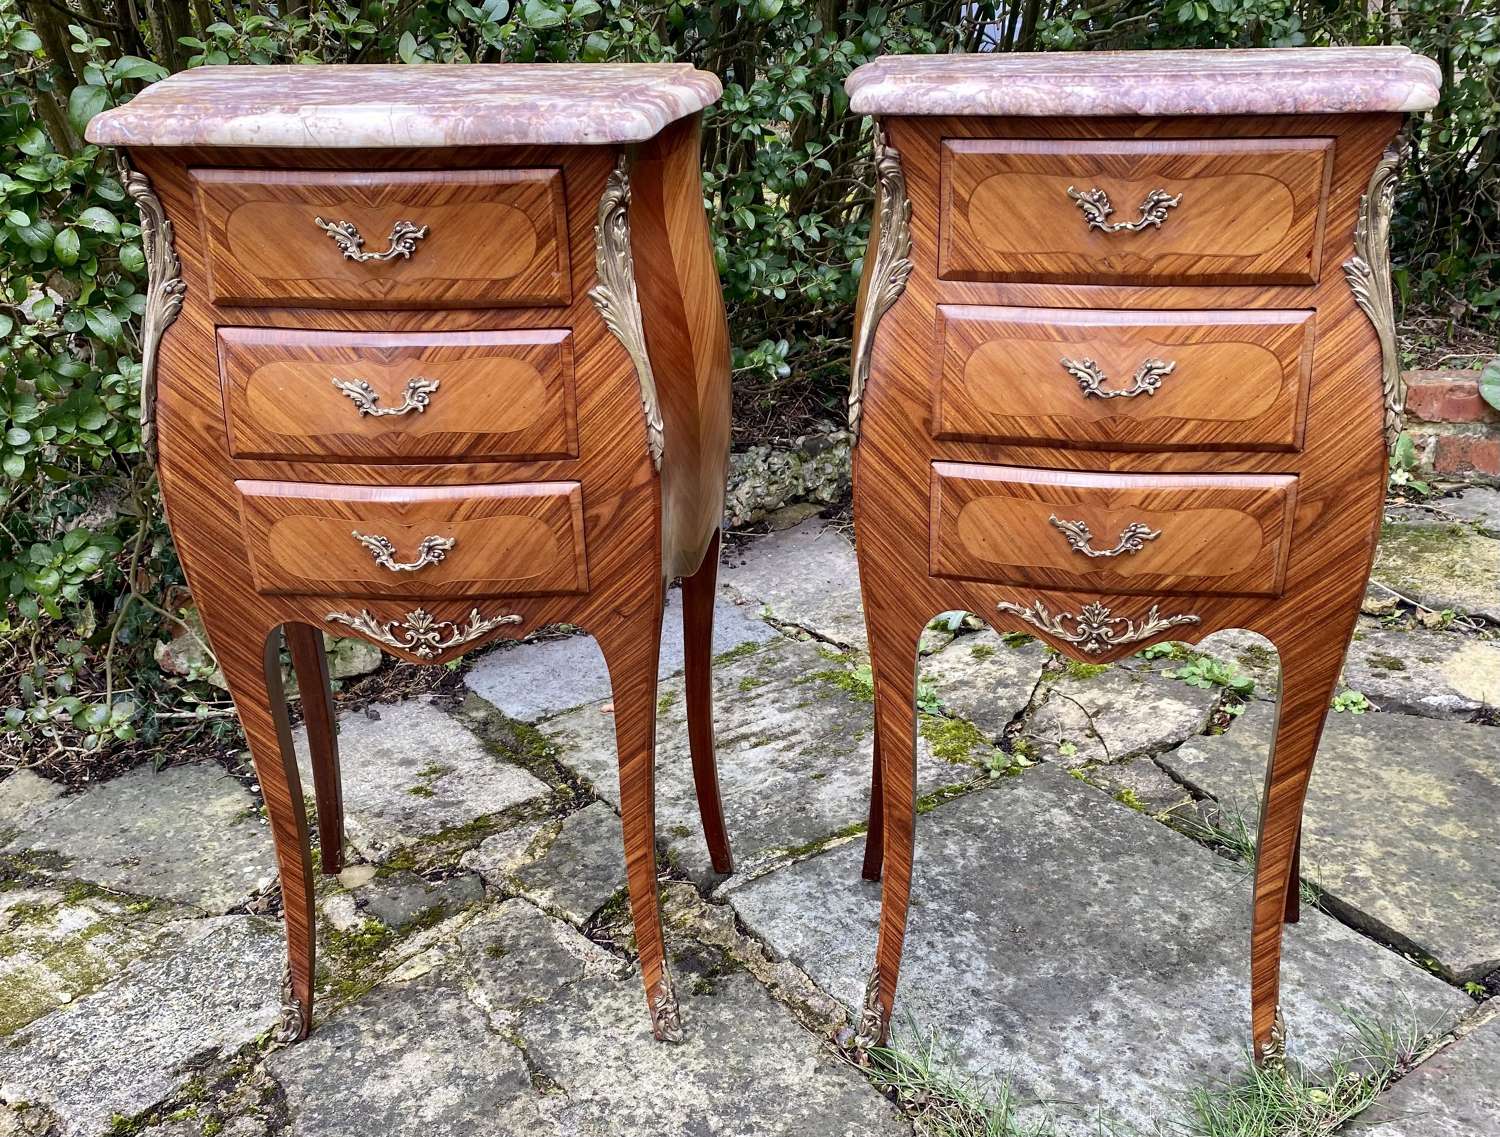 Pair of tulipwood bedside tables